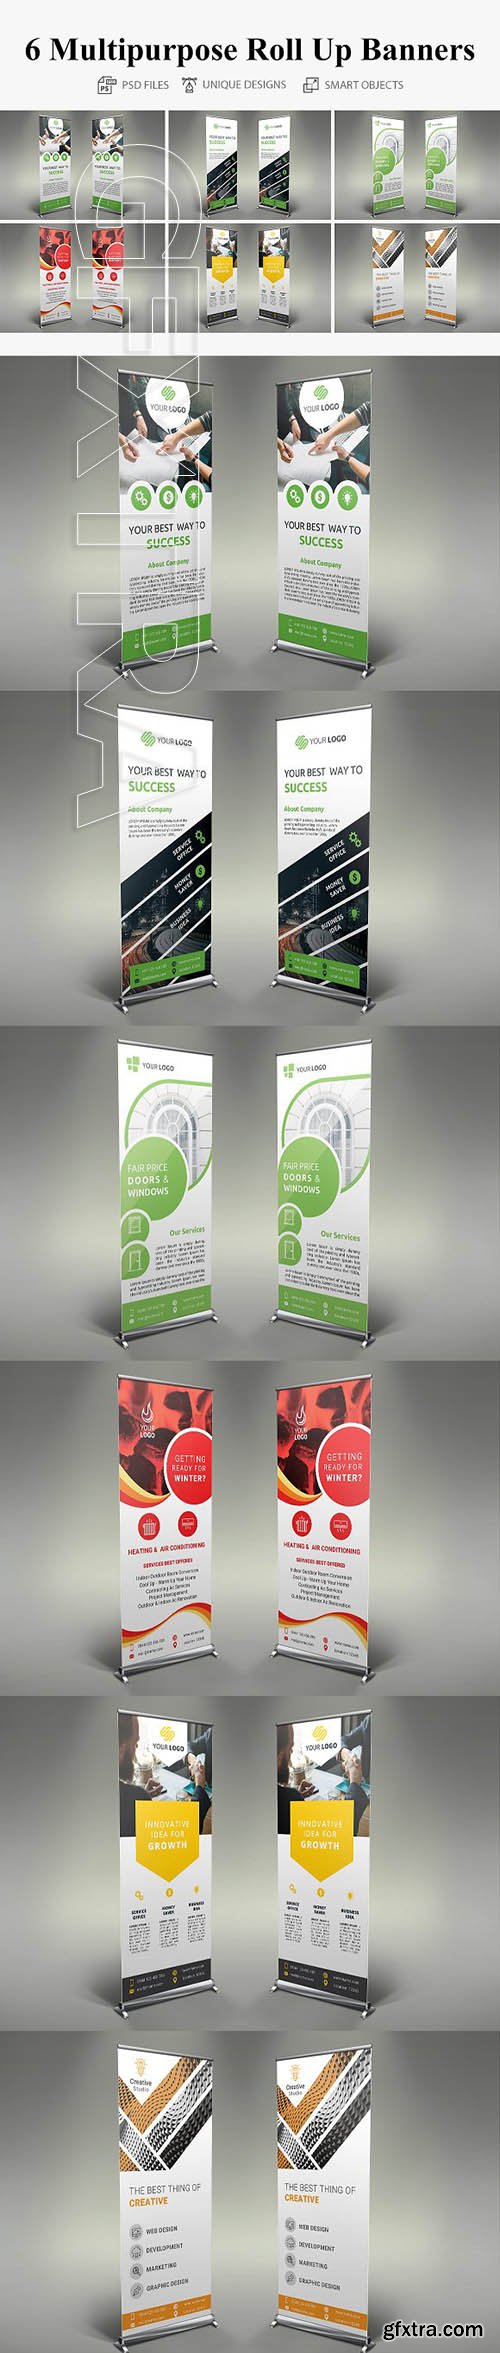 CreativeMarket - 6 Multipurpose Roll Up Banners 2823747